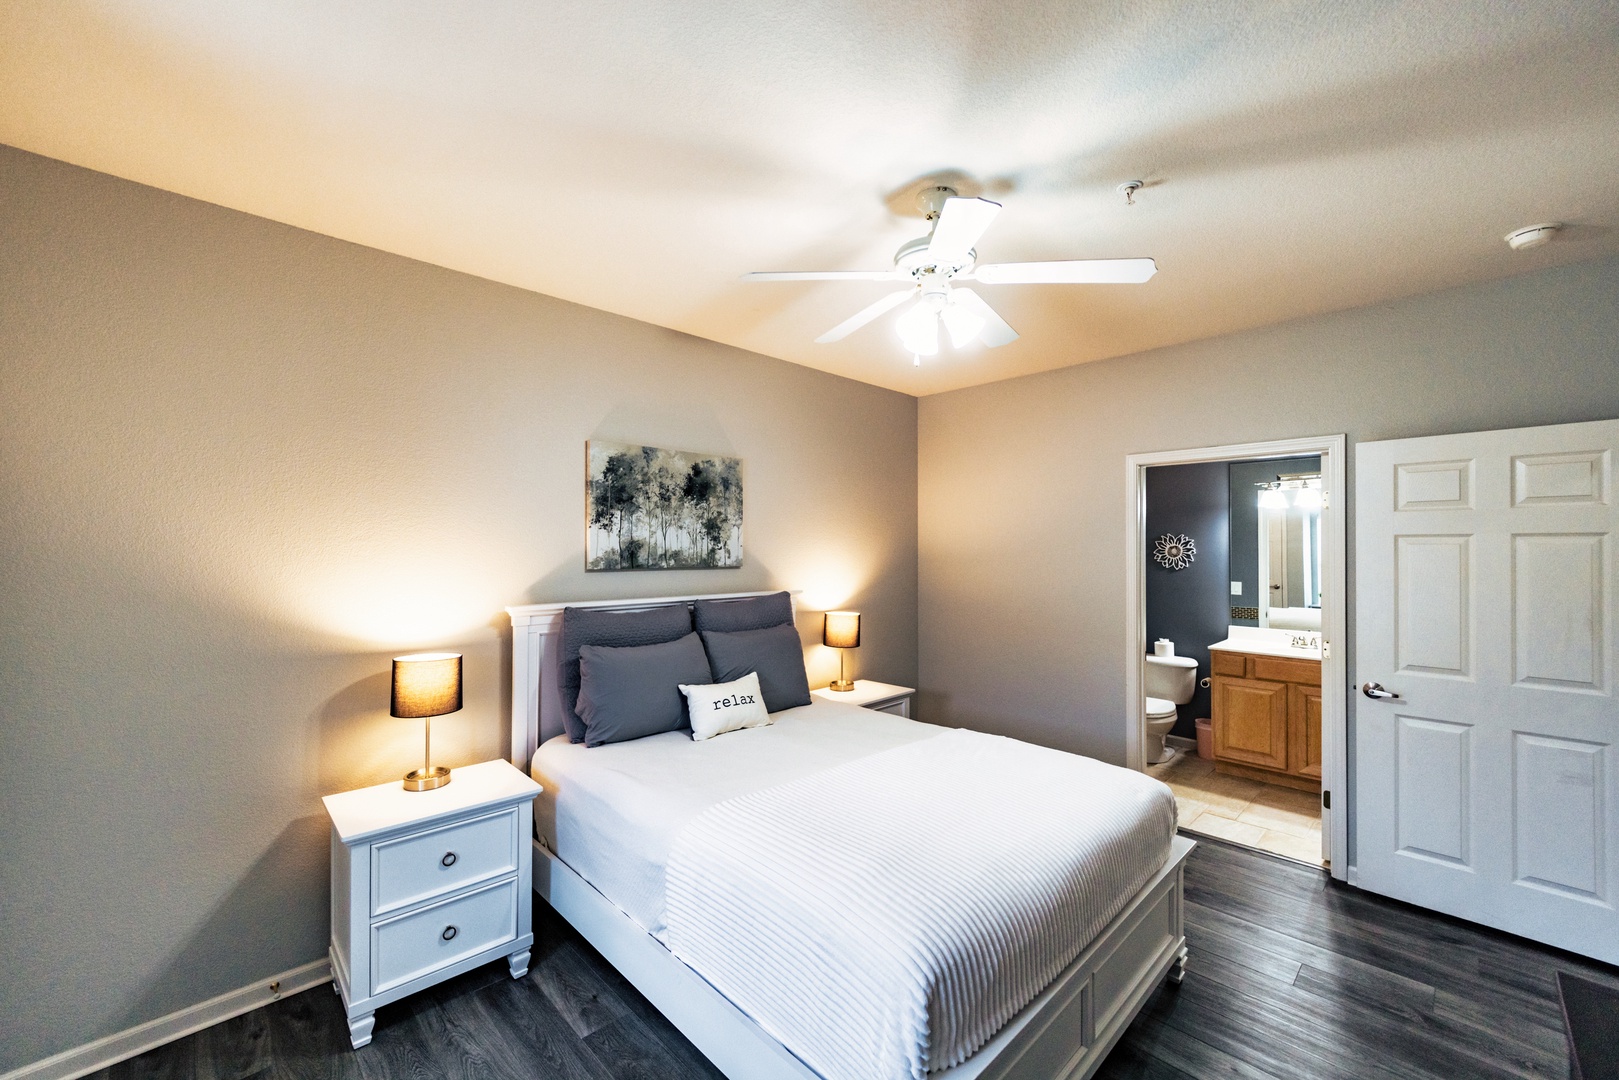 The second spacious suite offers a queen bed, ensuite bath, & TV